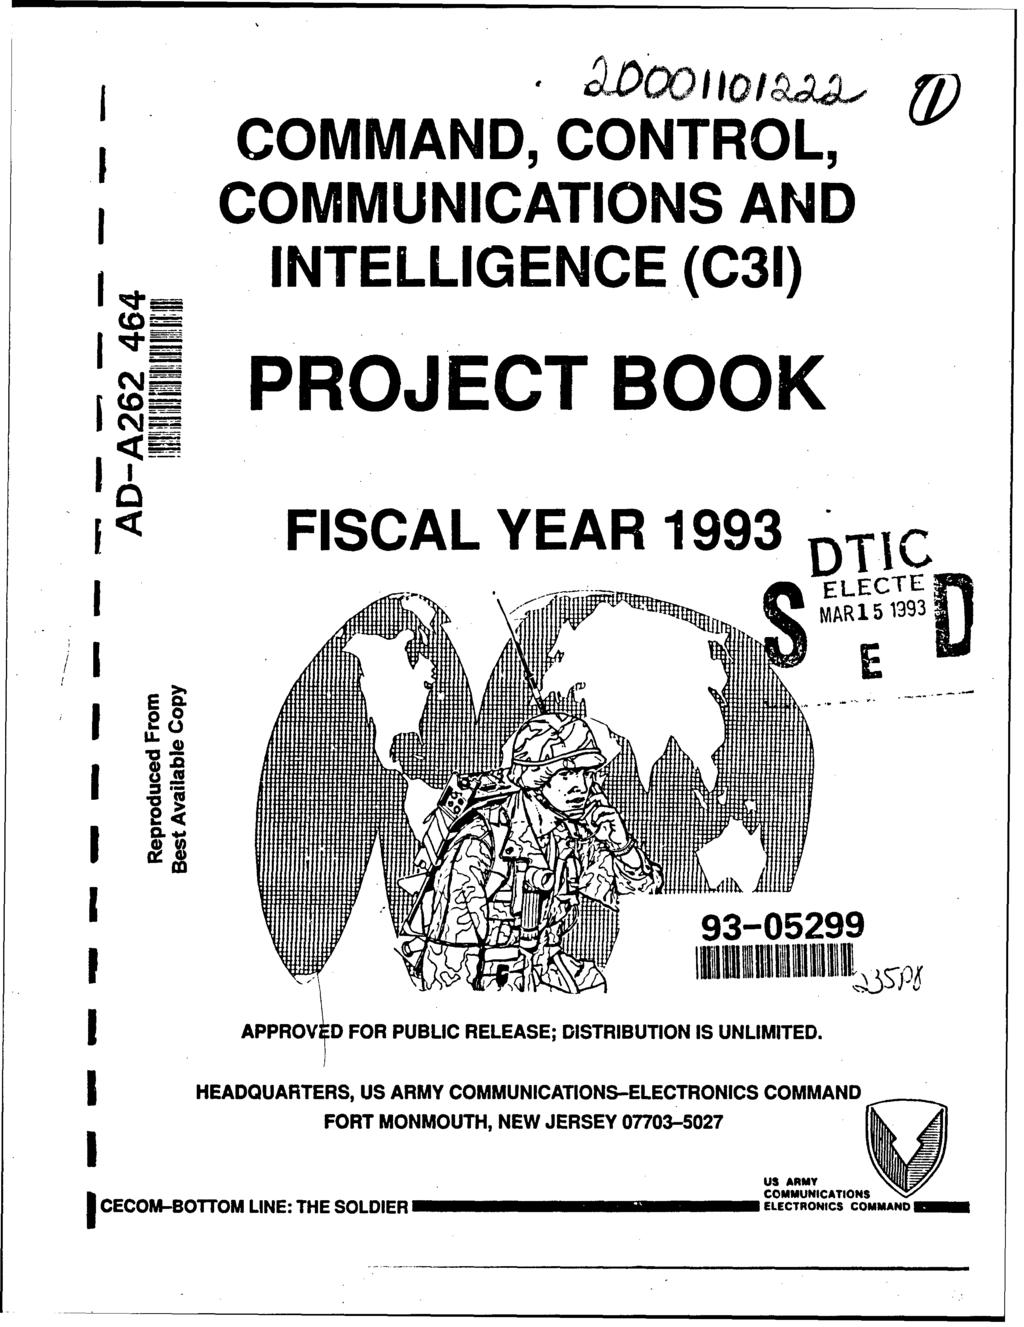 K_ COMMAND, CONTROL, COMMUNCATONS AND NTELLGENCE (C31) PROJECT BOOK FSCAL YEAR 1993 DTC - MAR15 1393 [~~n0o... 1 93-05299.